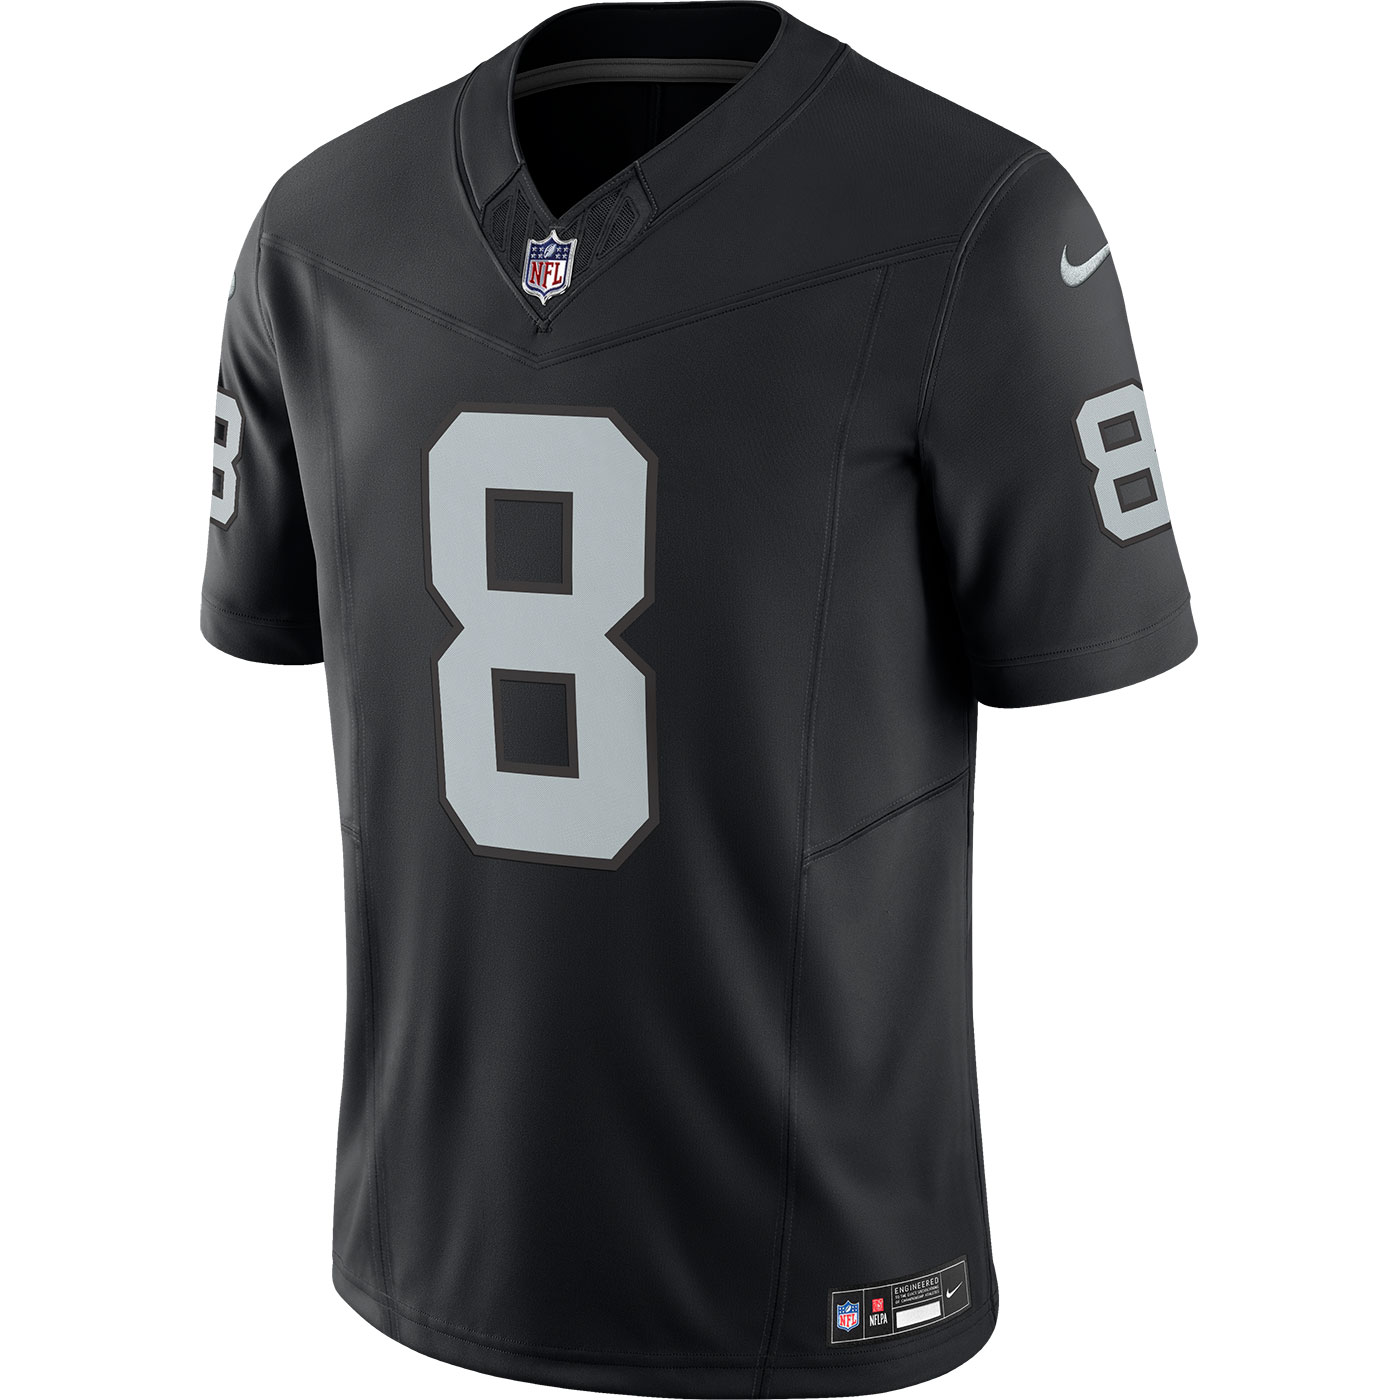 Raiders jersey clearance price